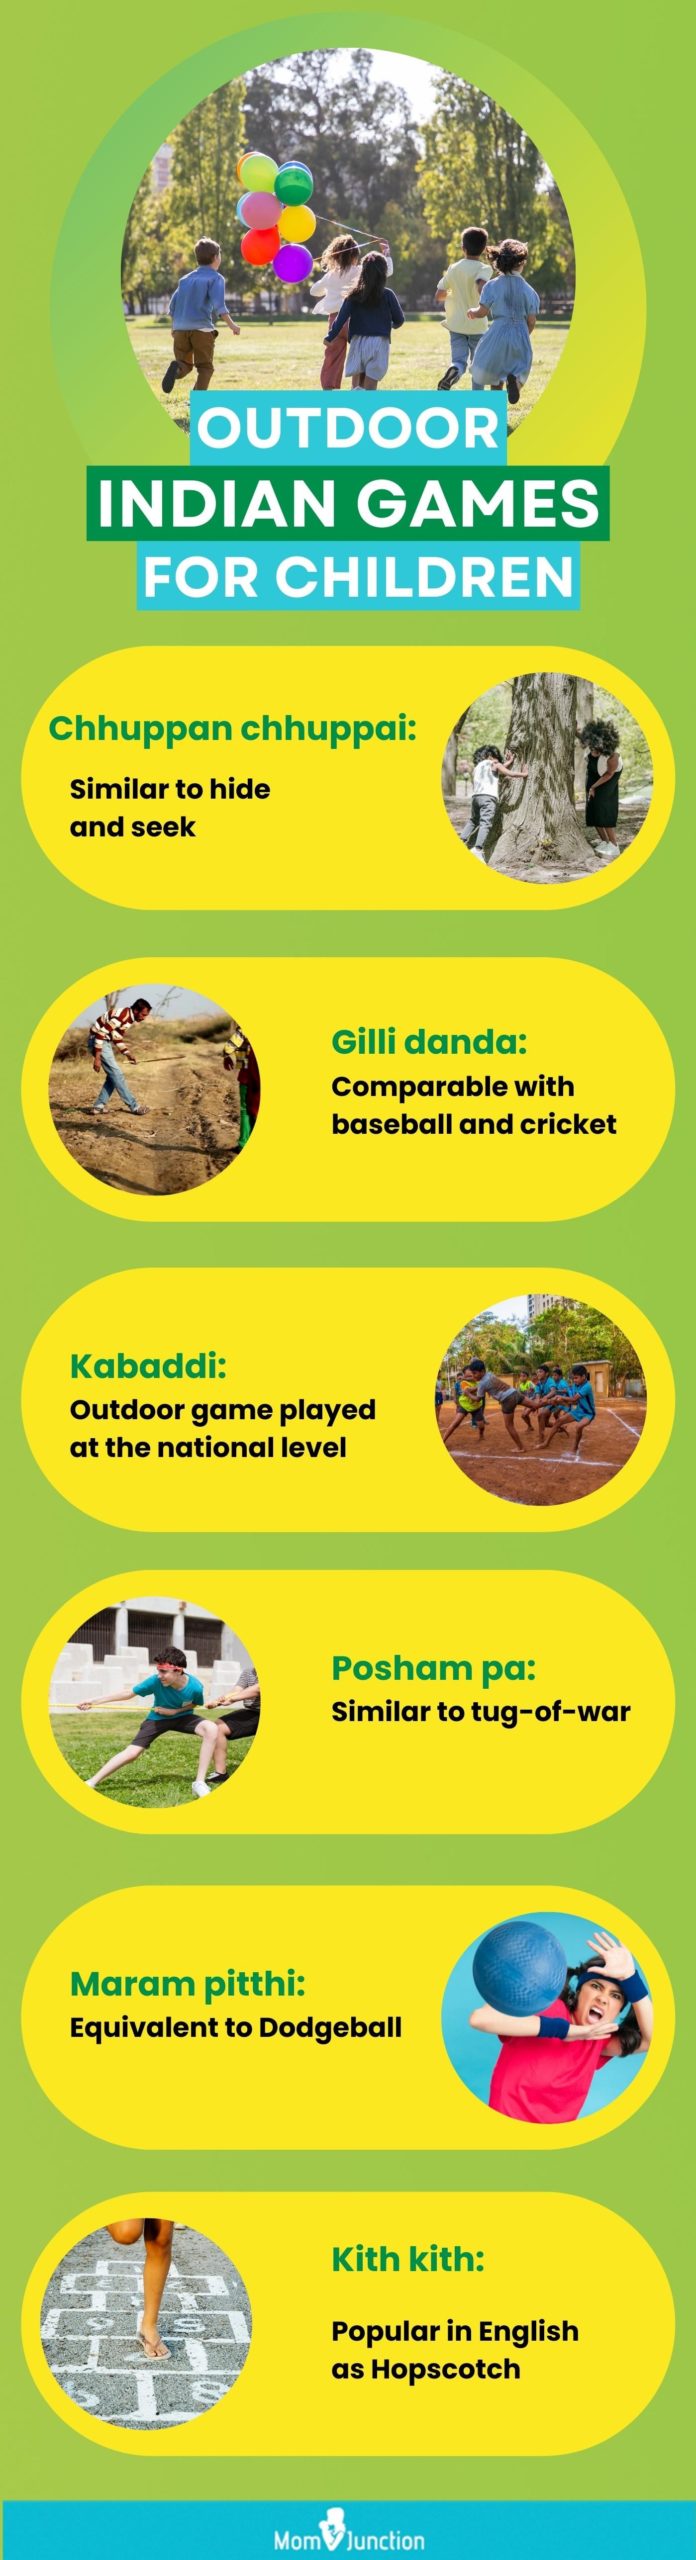 outdoor indian games for children (infographic)